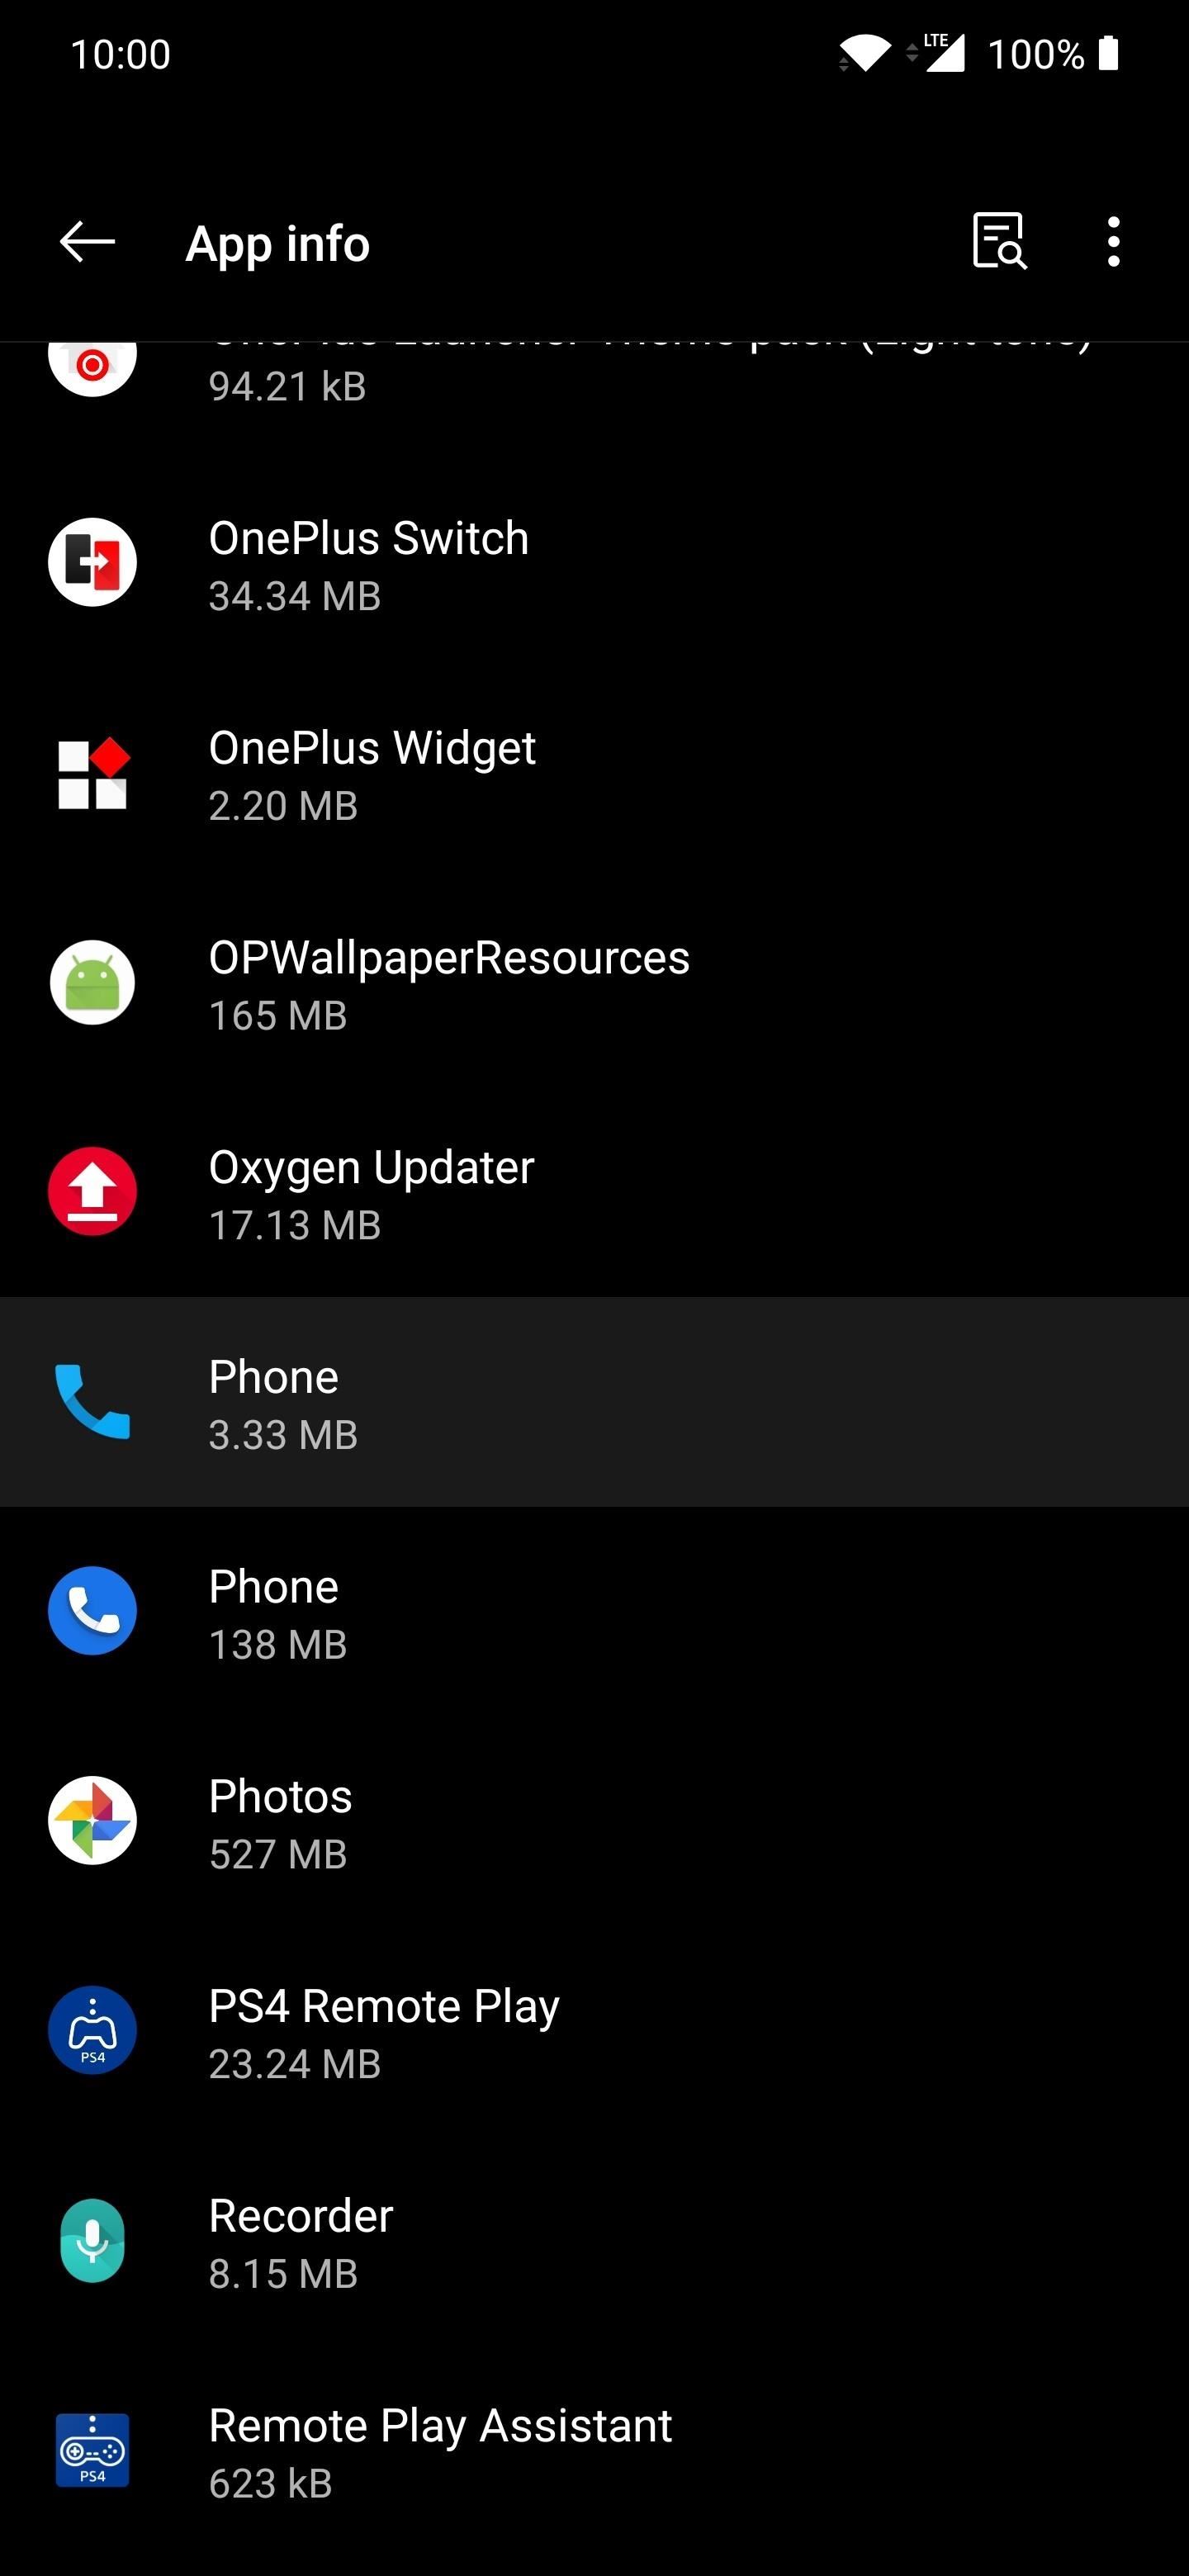 How to Get Google's Call Screen Feature on Your OnePlus